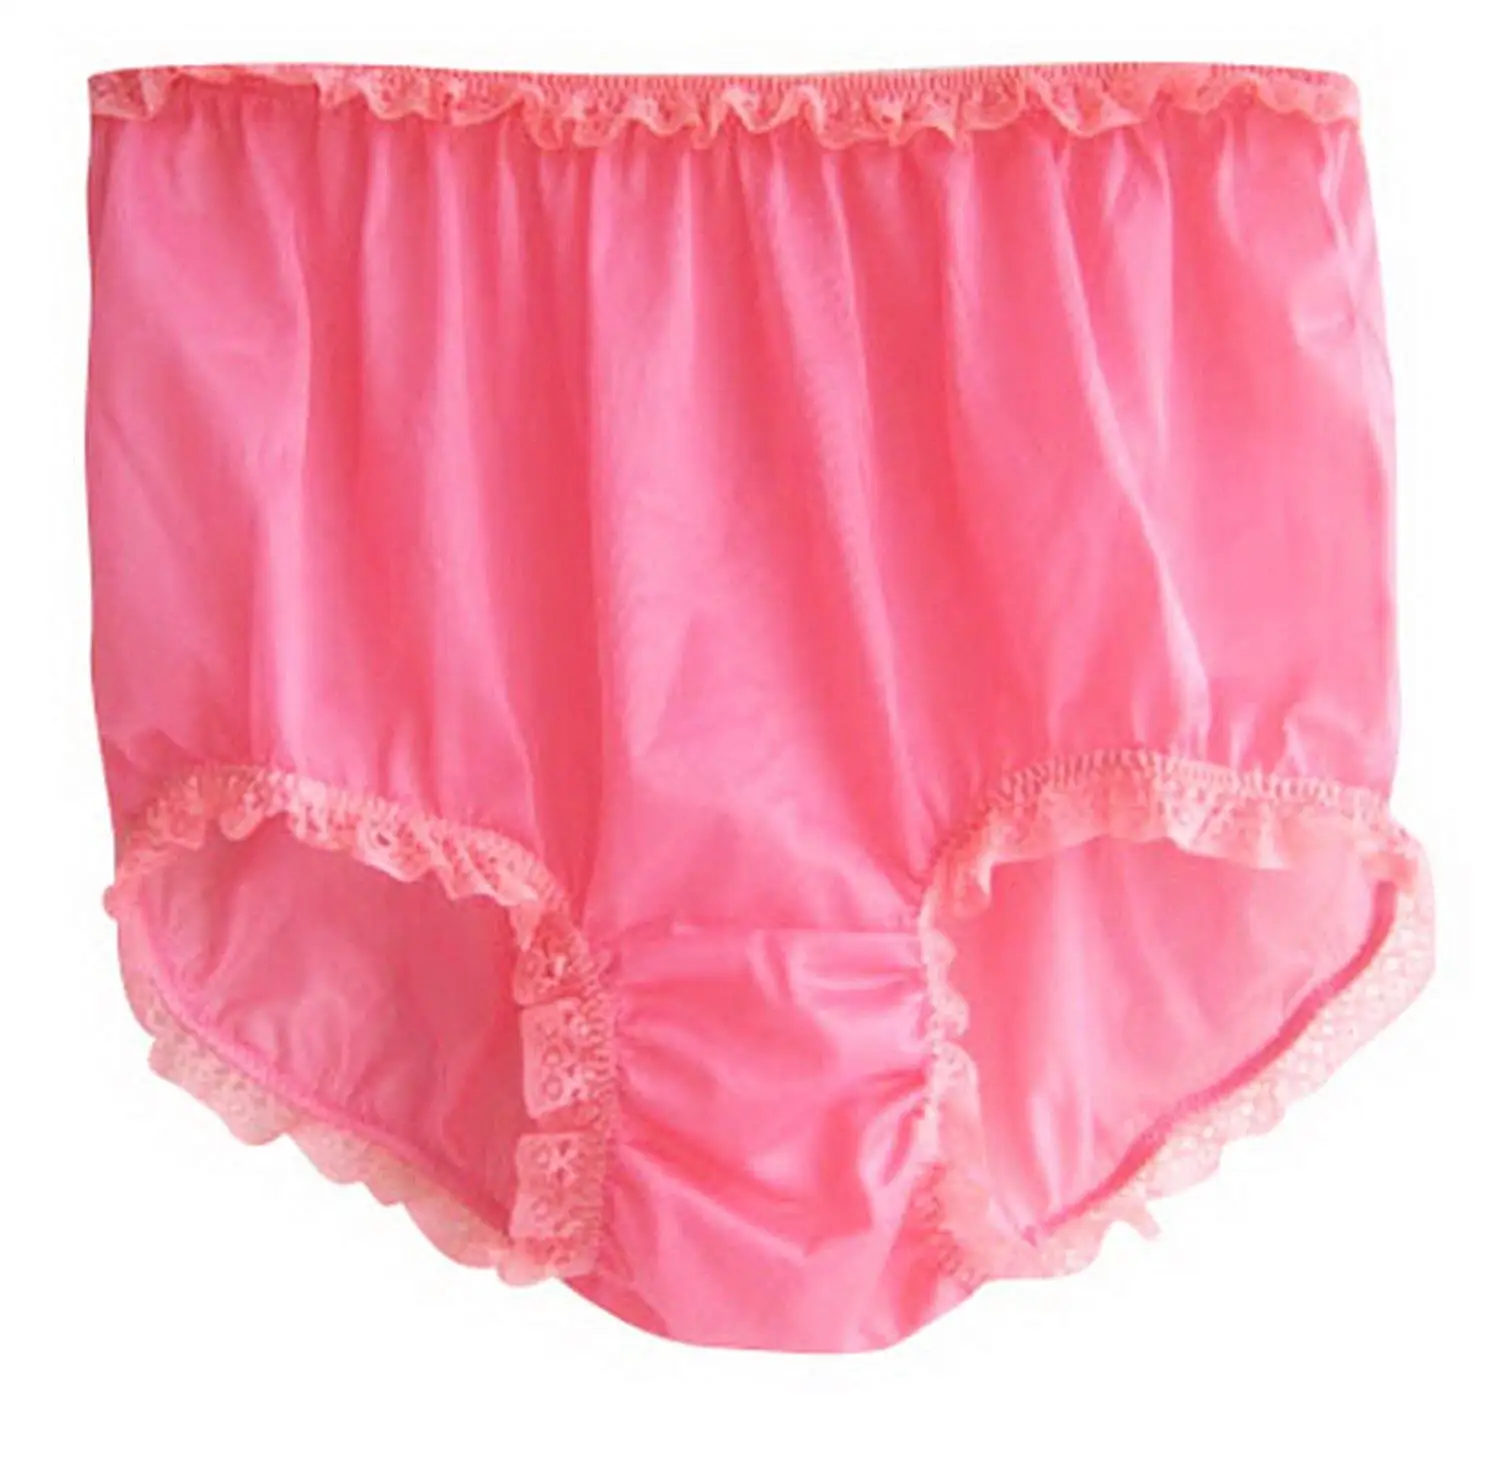 Cheap Pink Nylon Knickers, find Pink Nylon Knickers deals on line at ...